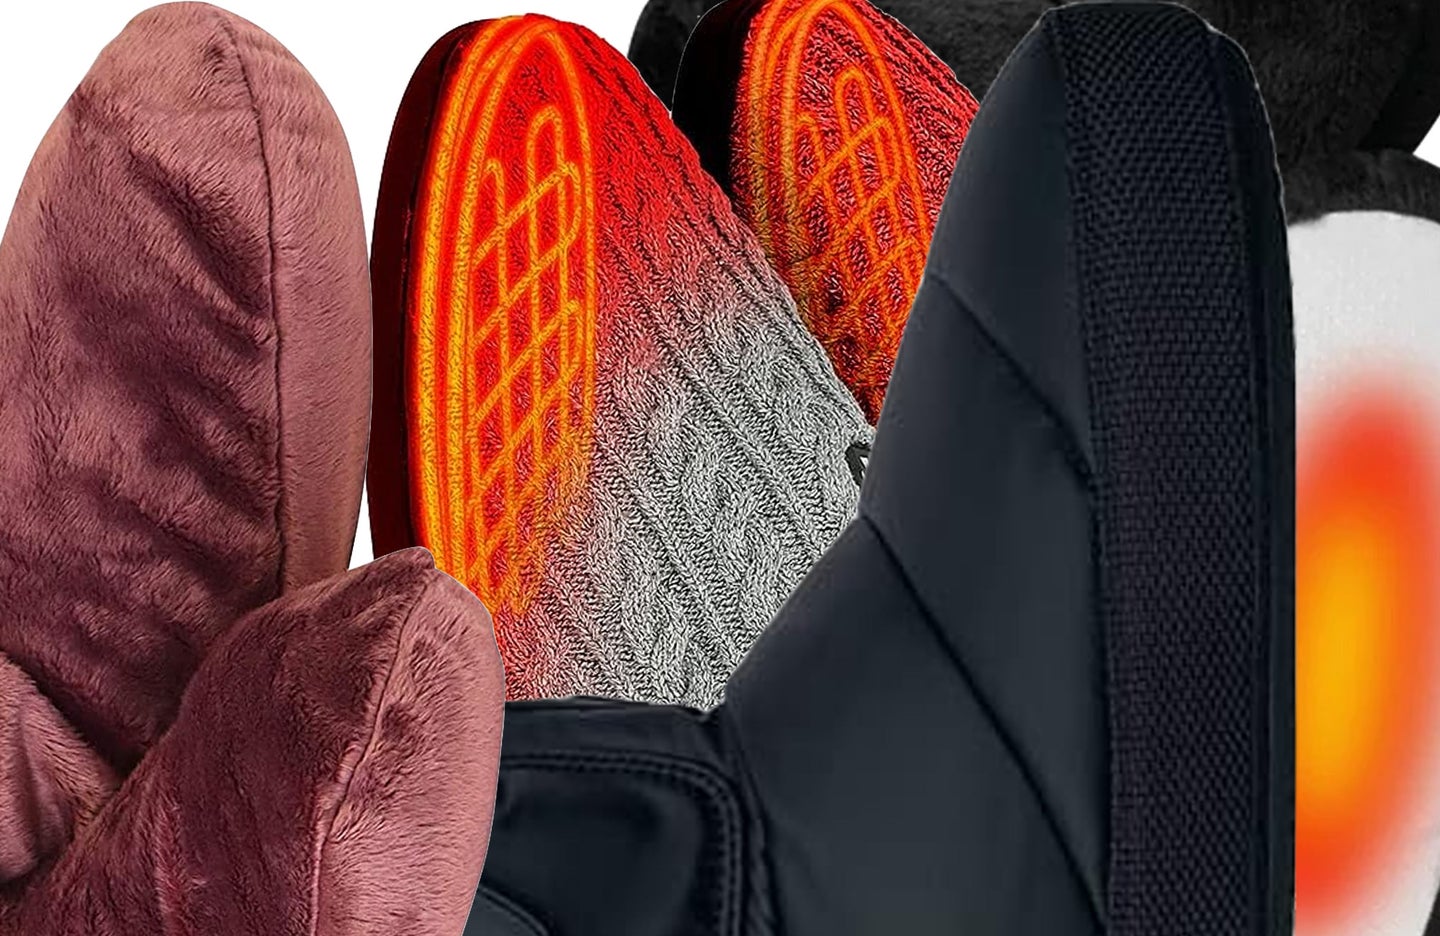 The best heated slippers will help keep your warm all year.